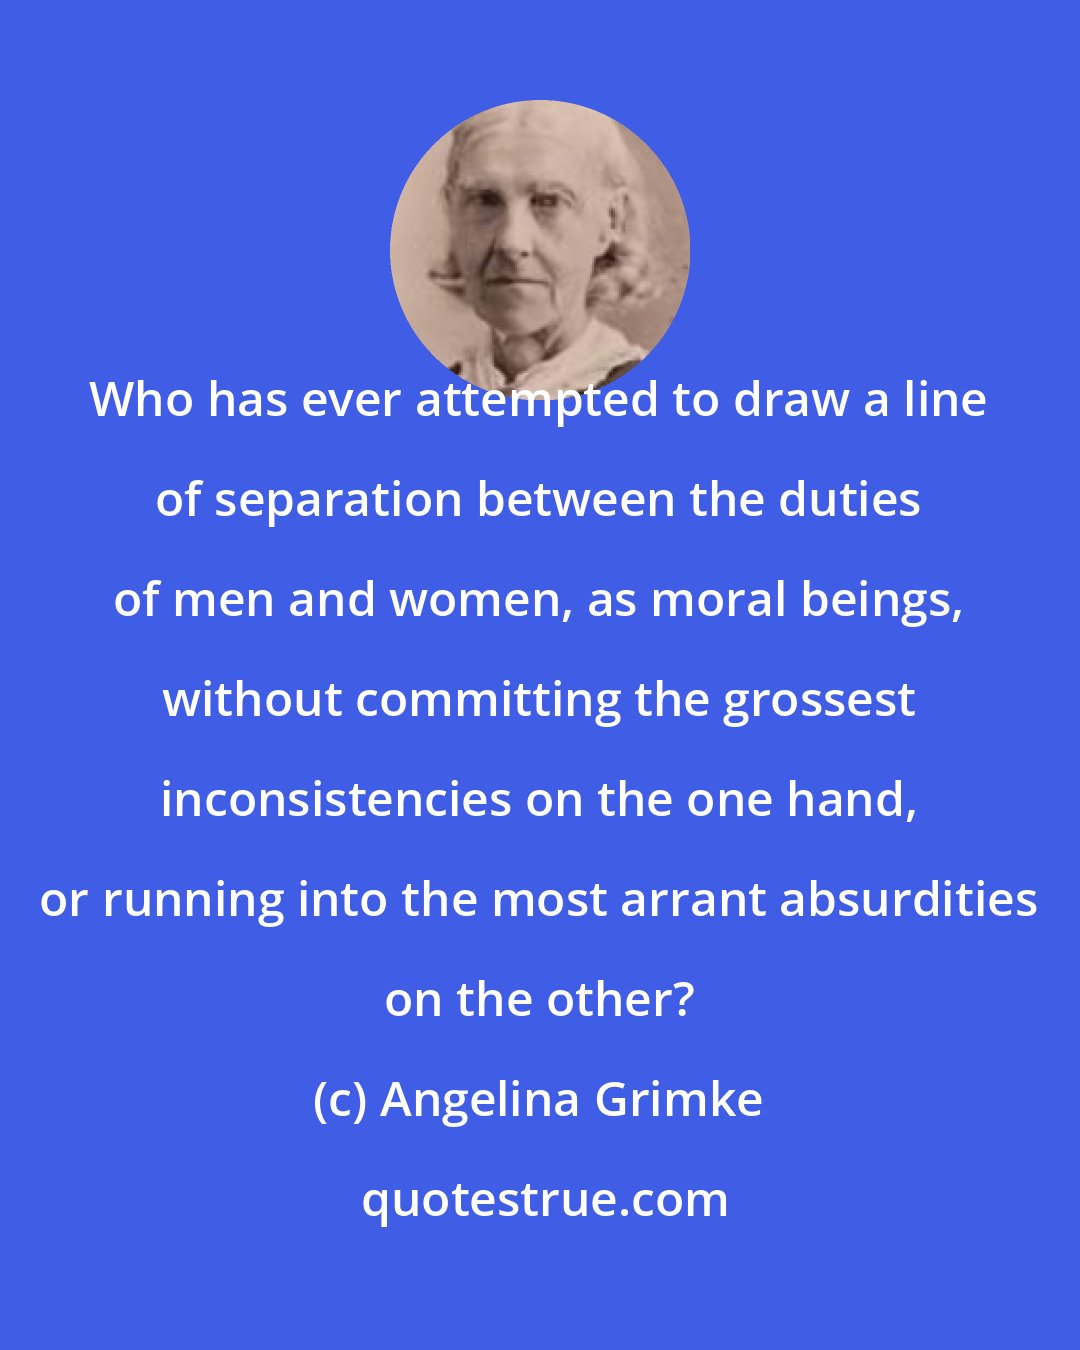 Angelina Grimke: Who has ever attempted to draw a line of separation between the duties of men and women, as moral beings, without committing the grossest inconsistencies on the one hand, or running into the most arrant absurdities on the other?